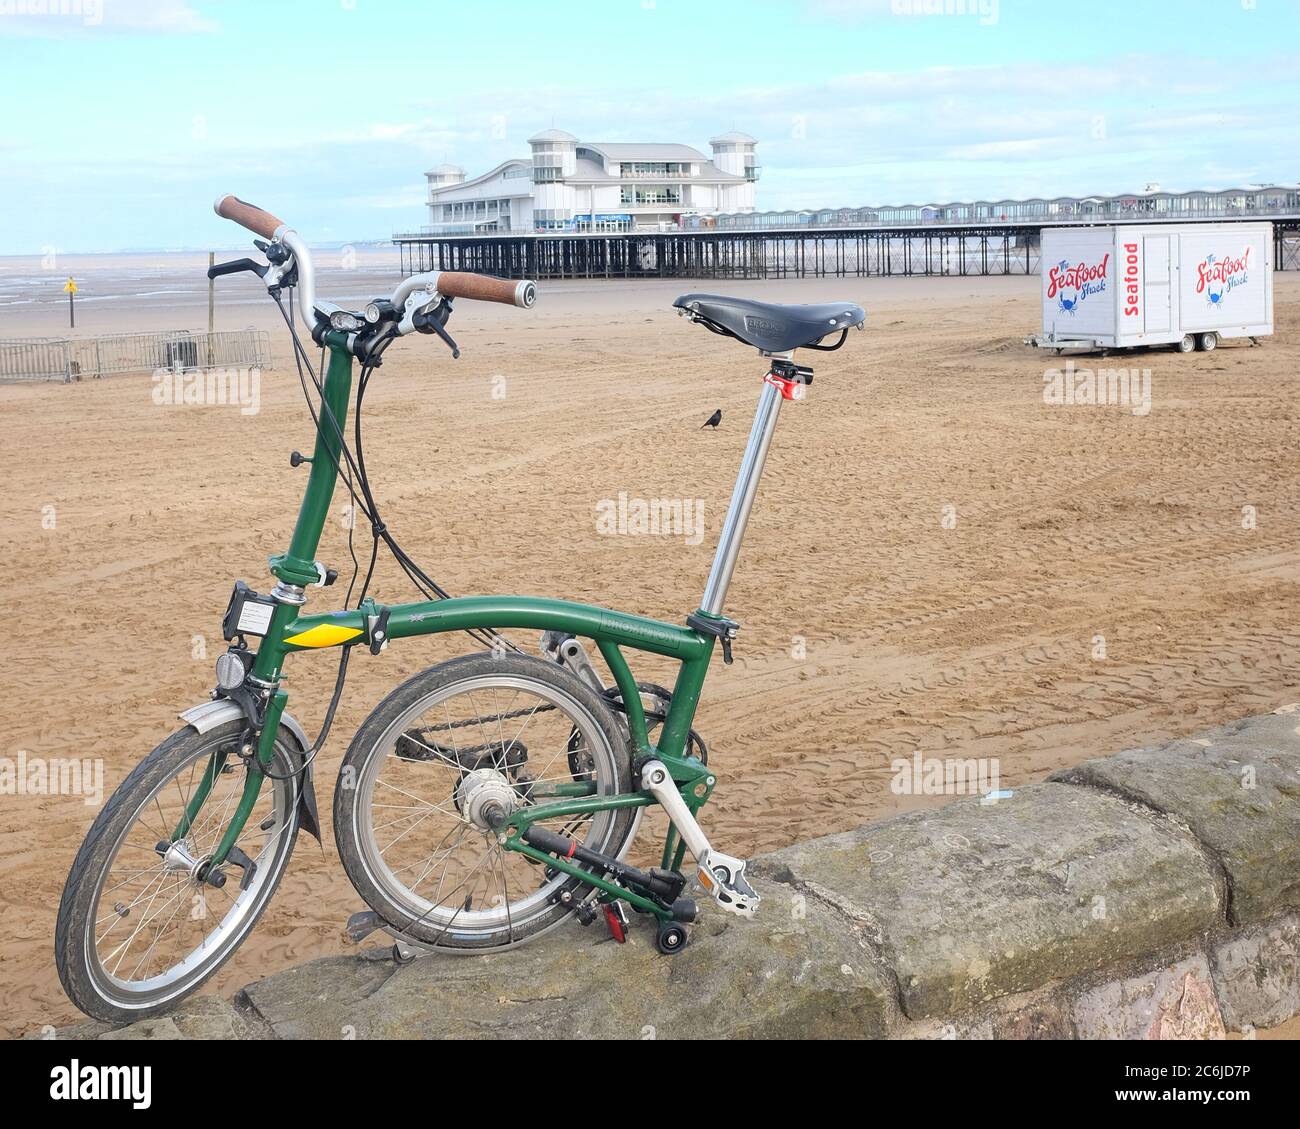 July 2020 - Brompton folding bike in front of the Weston super Mare pier. Stock Photo